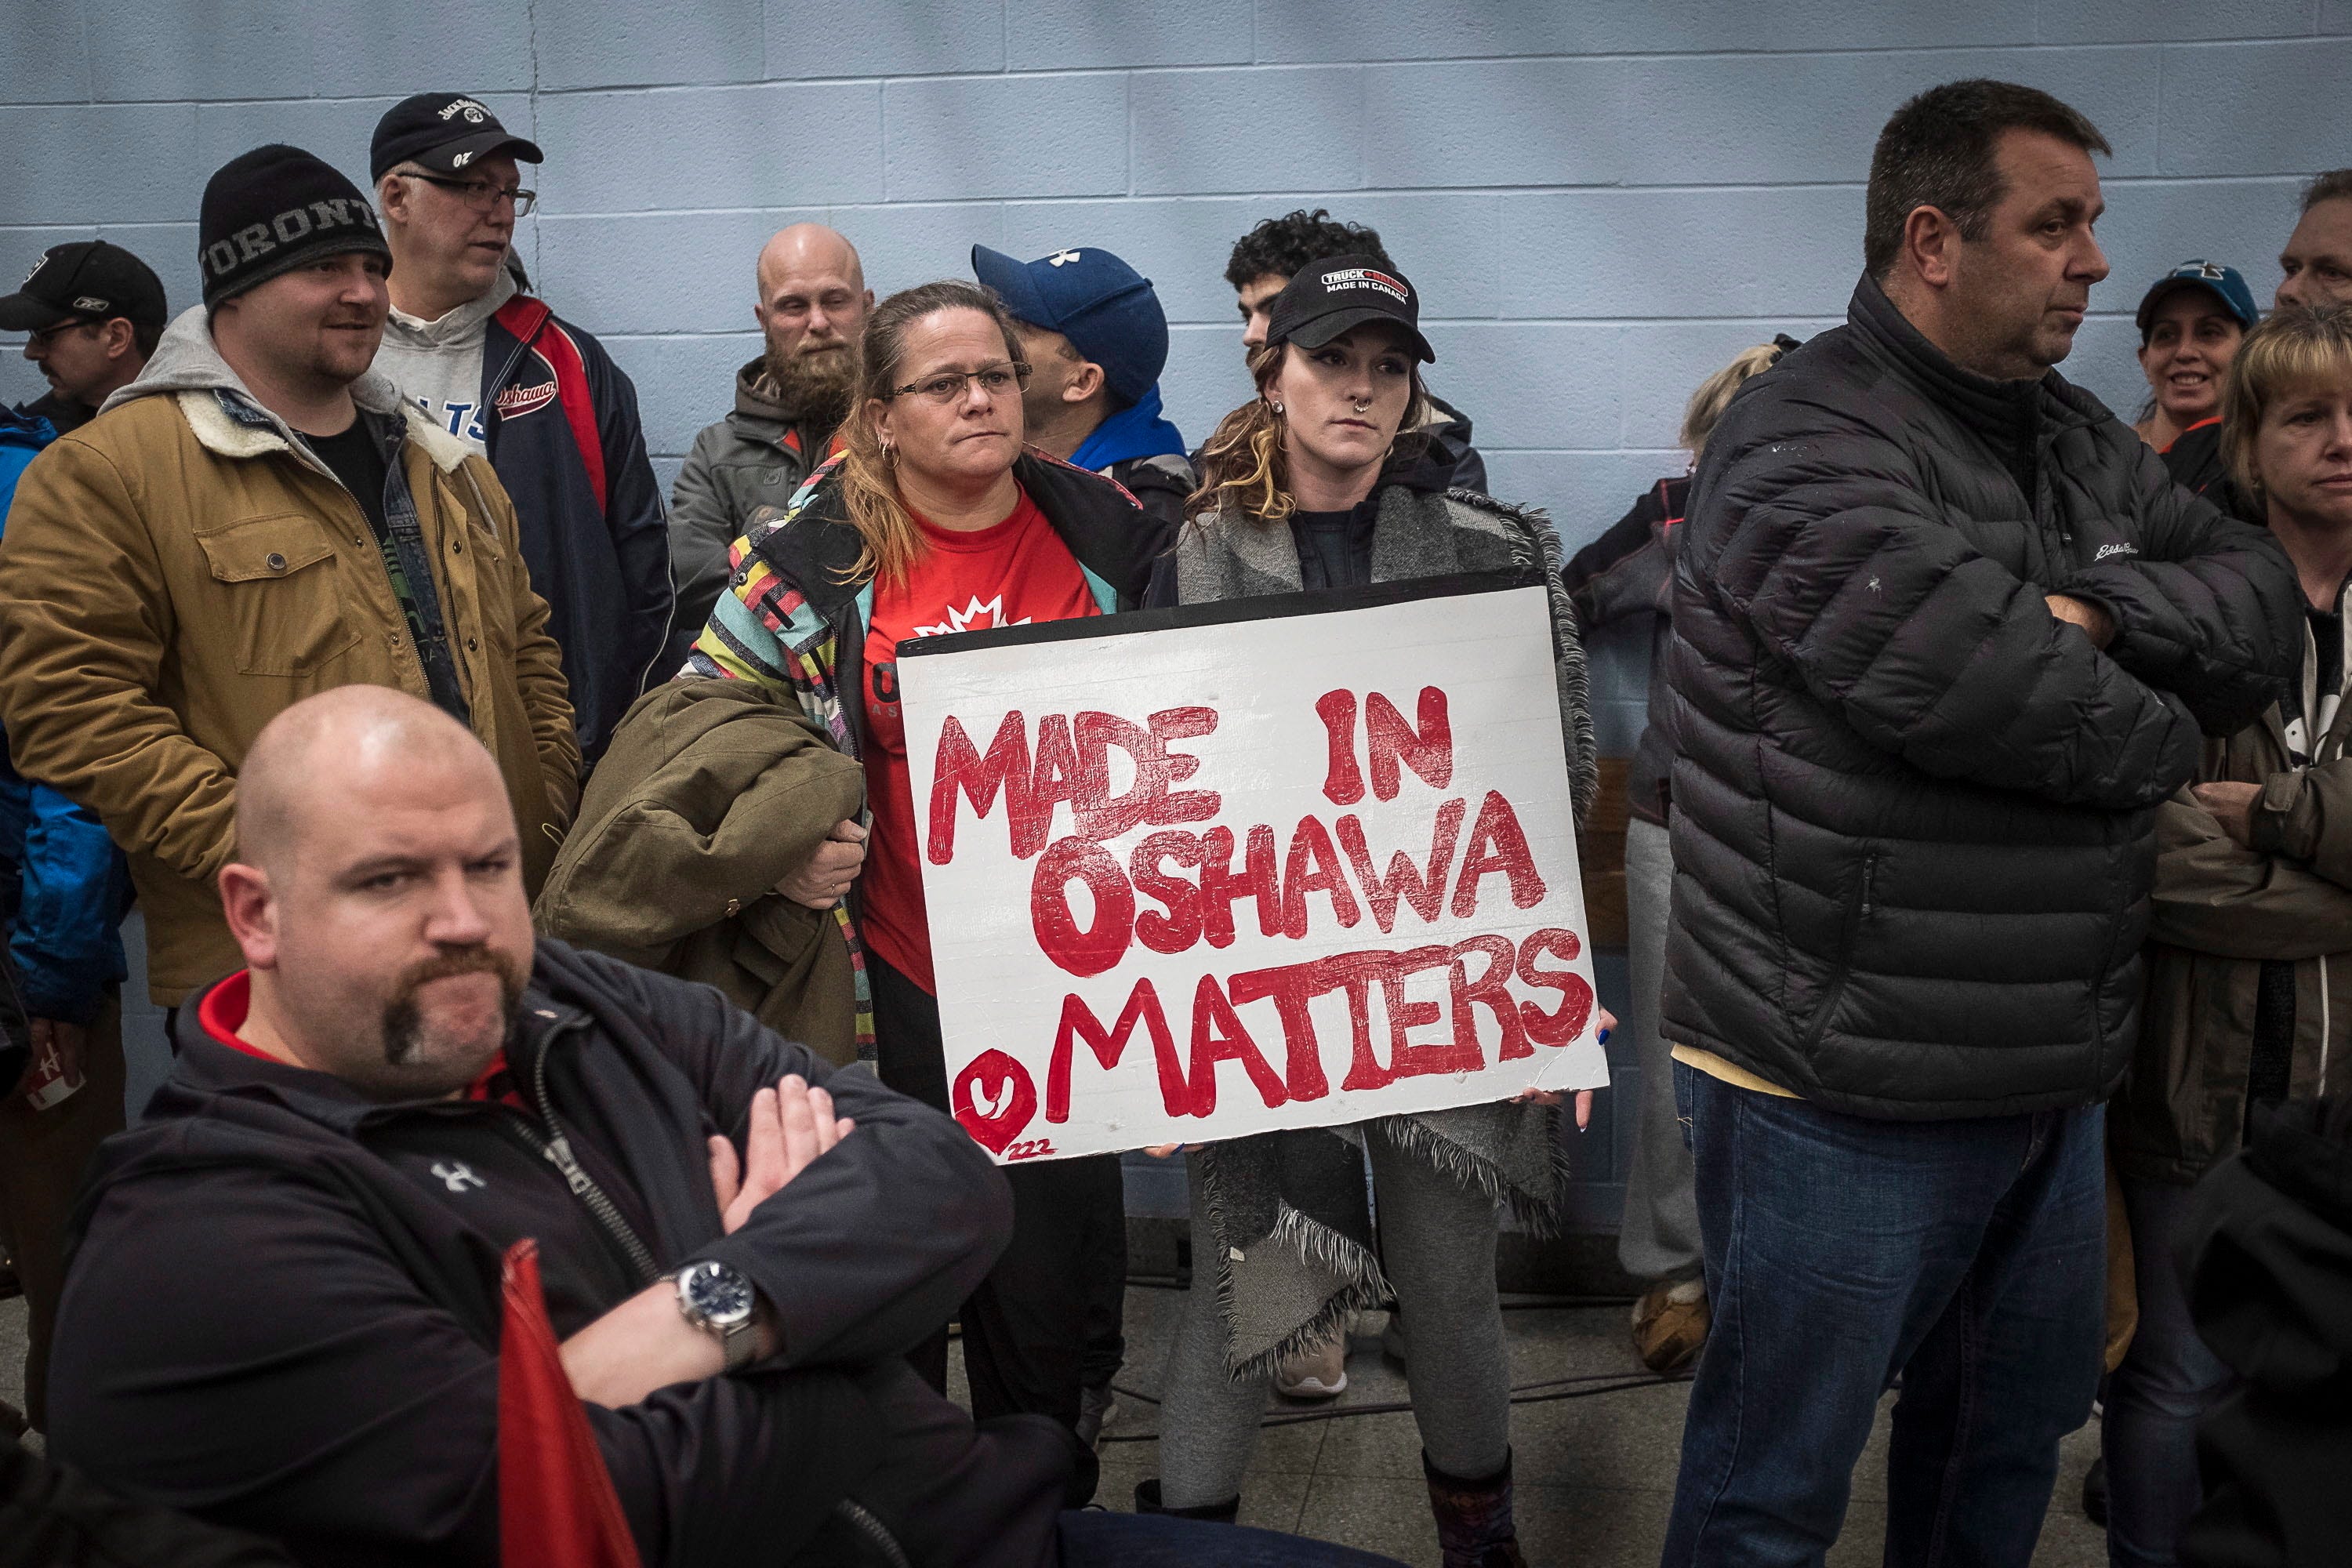 Laurie Nickel, center left, and her daughter Stephanie hold a sign during a UNIFOR union meeting between the workers of Oshawa's General Motors plant with Jerry Dias, president of UNIFOR, at the plant in Oshawa, Ontario, Monday, Nov. 26, 2018. General Motors will cut up to 14,000 workers in North America and put five plants up for possible closure as it abandons many of its car models and restructures to focus more on autonomous and electric vehicles, the automaker announced Monday. (Eduardo Lima/The Canadian Press via AP)